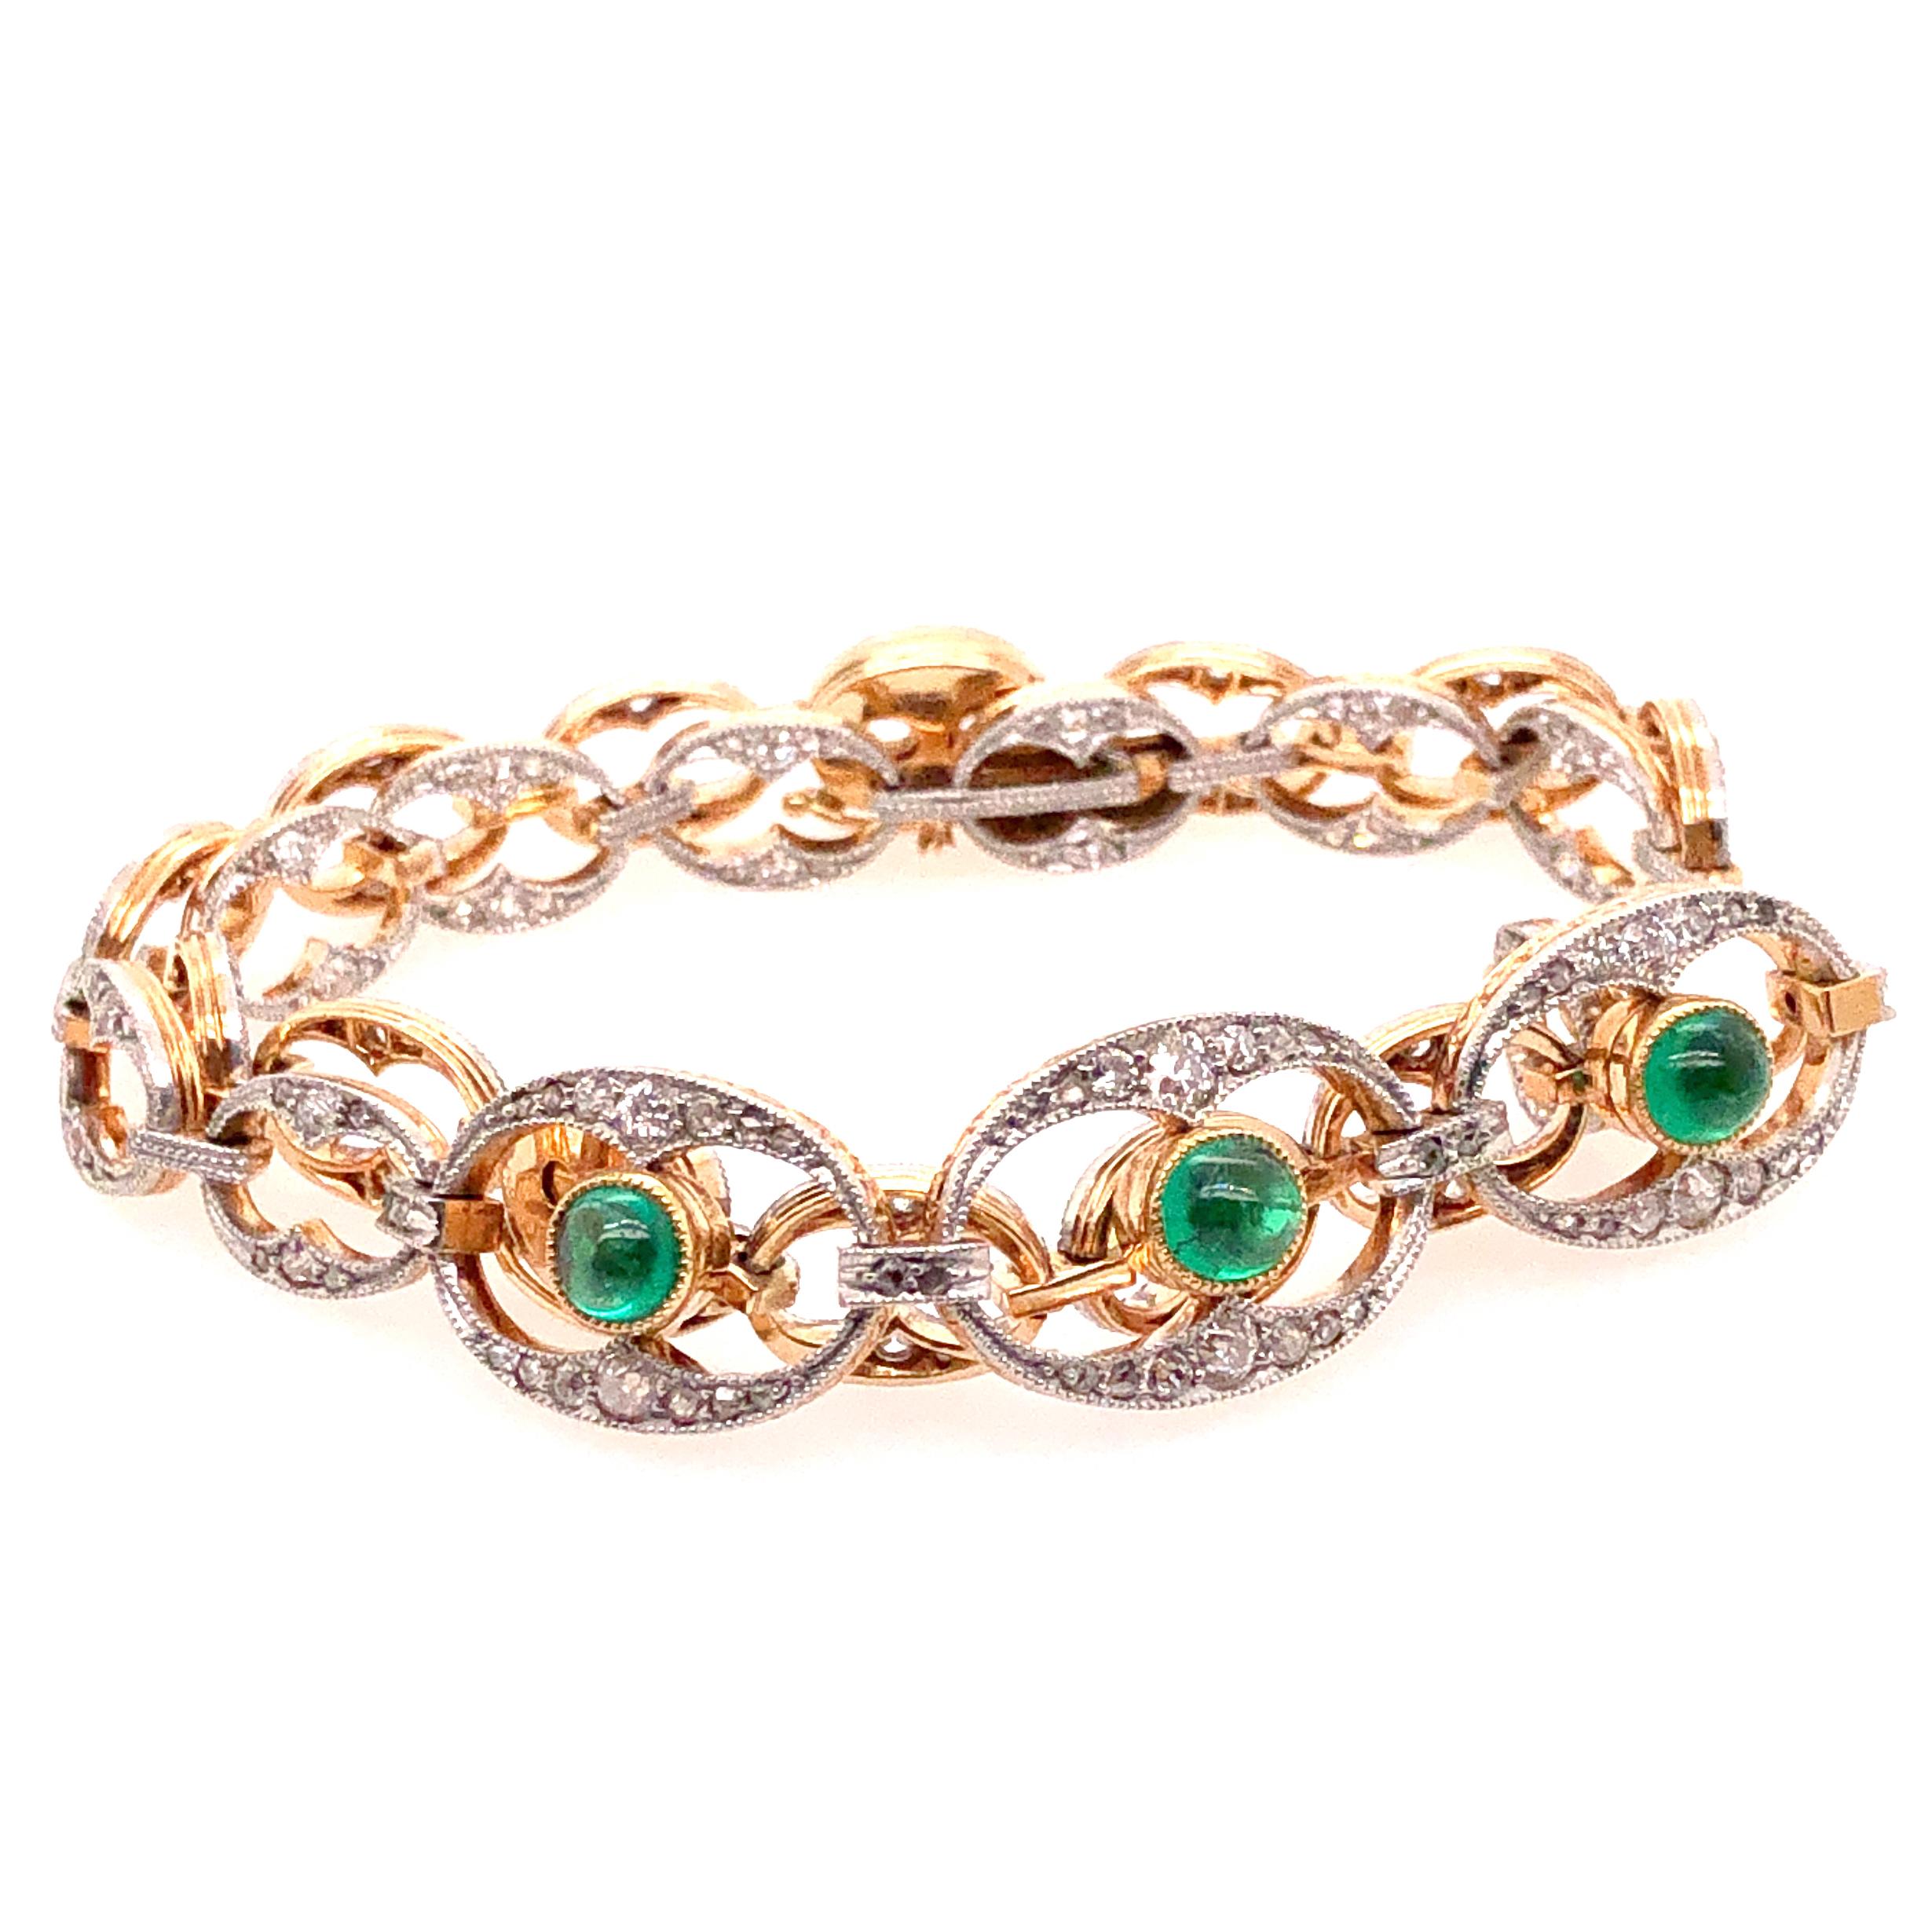 A very fine and intricate Belle Epoque collier de chien, which can also be worn as a bracelet. It has three beautiful emerald cabochons in the centre that are surrounded by old European cut diamonds. Each panel is studded with diamonds. The gold is